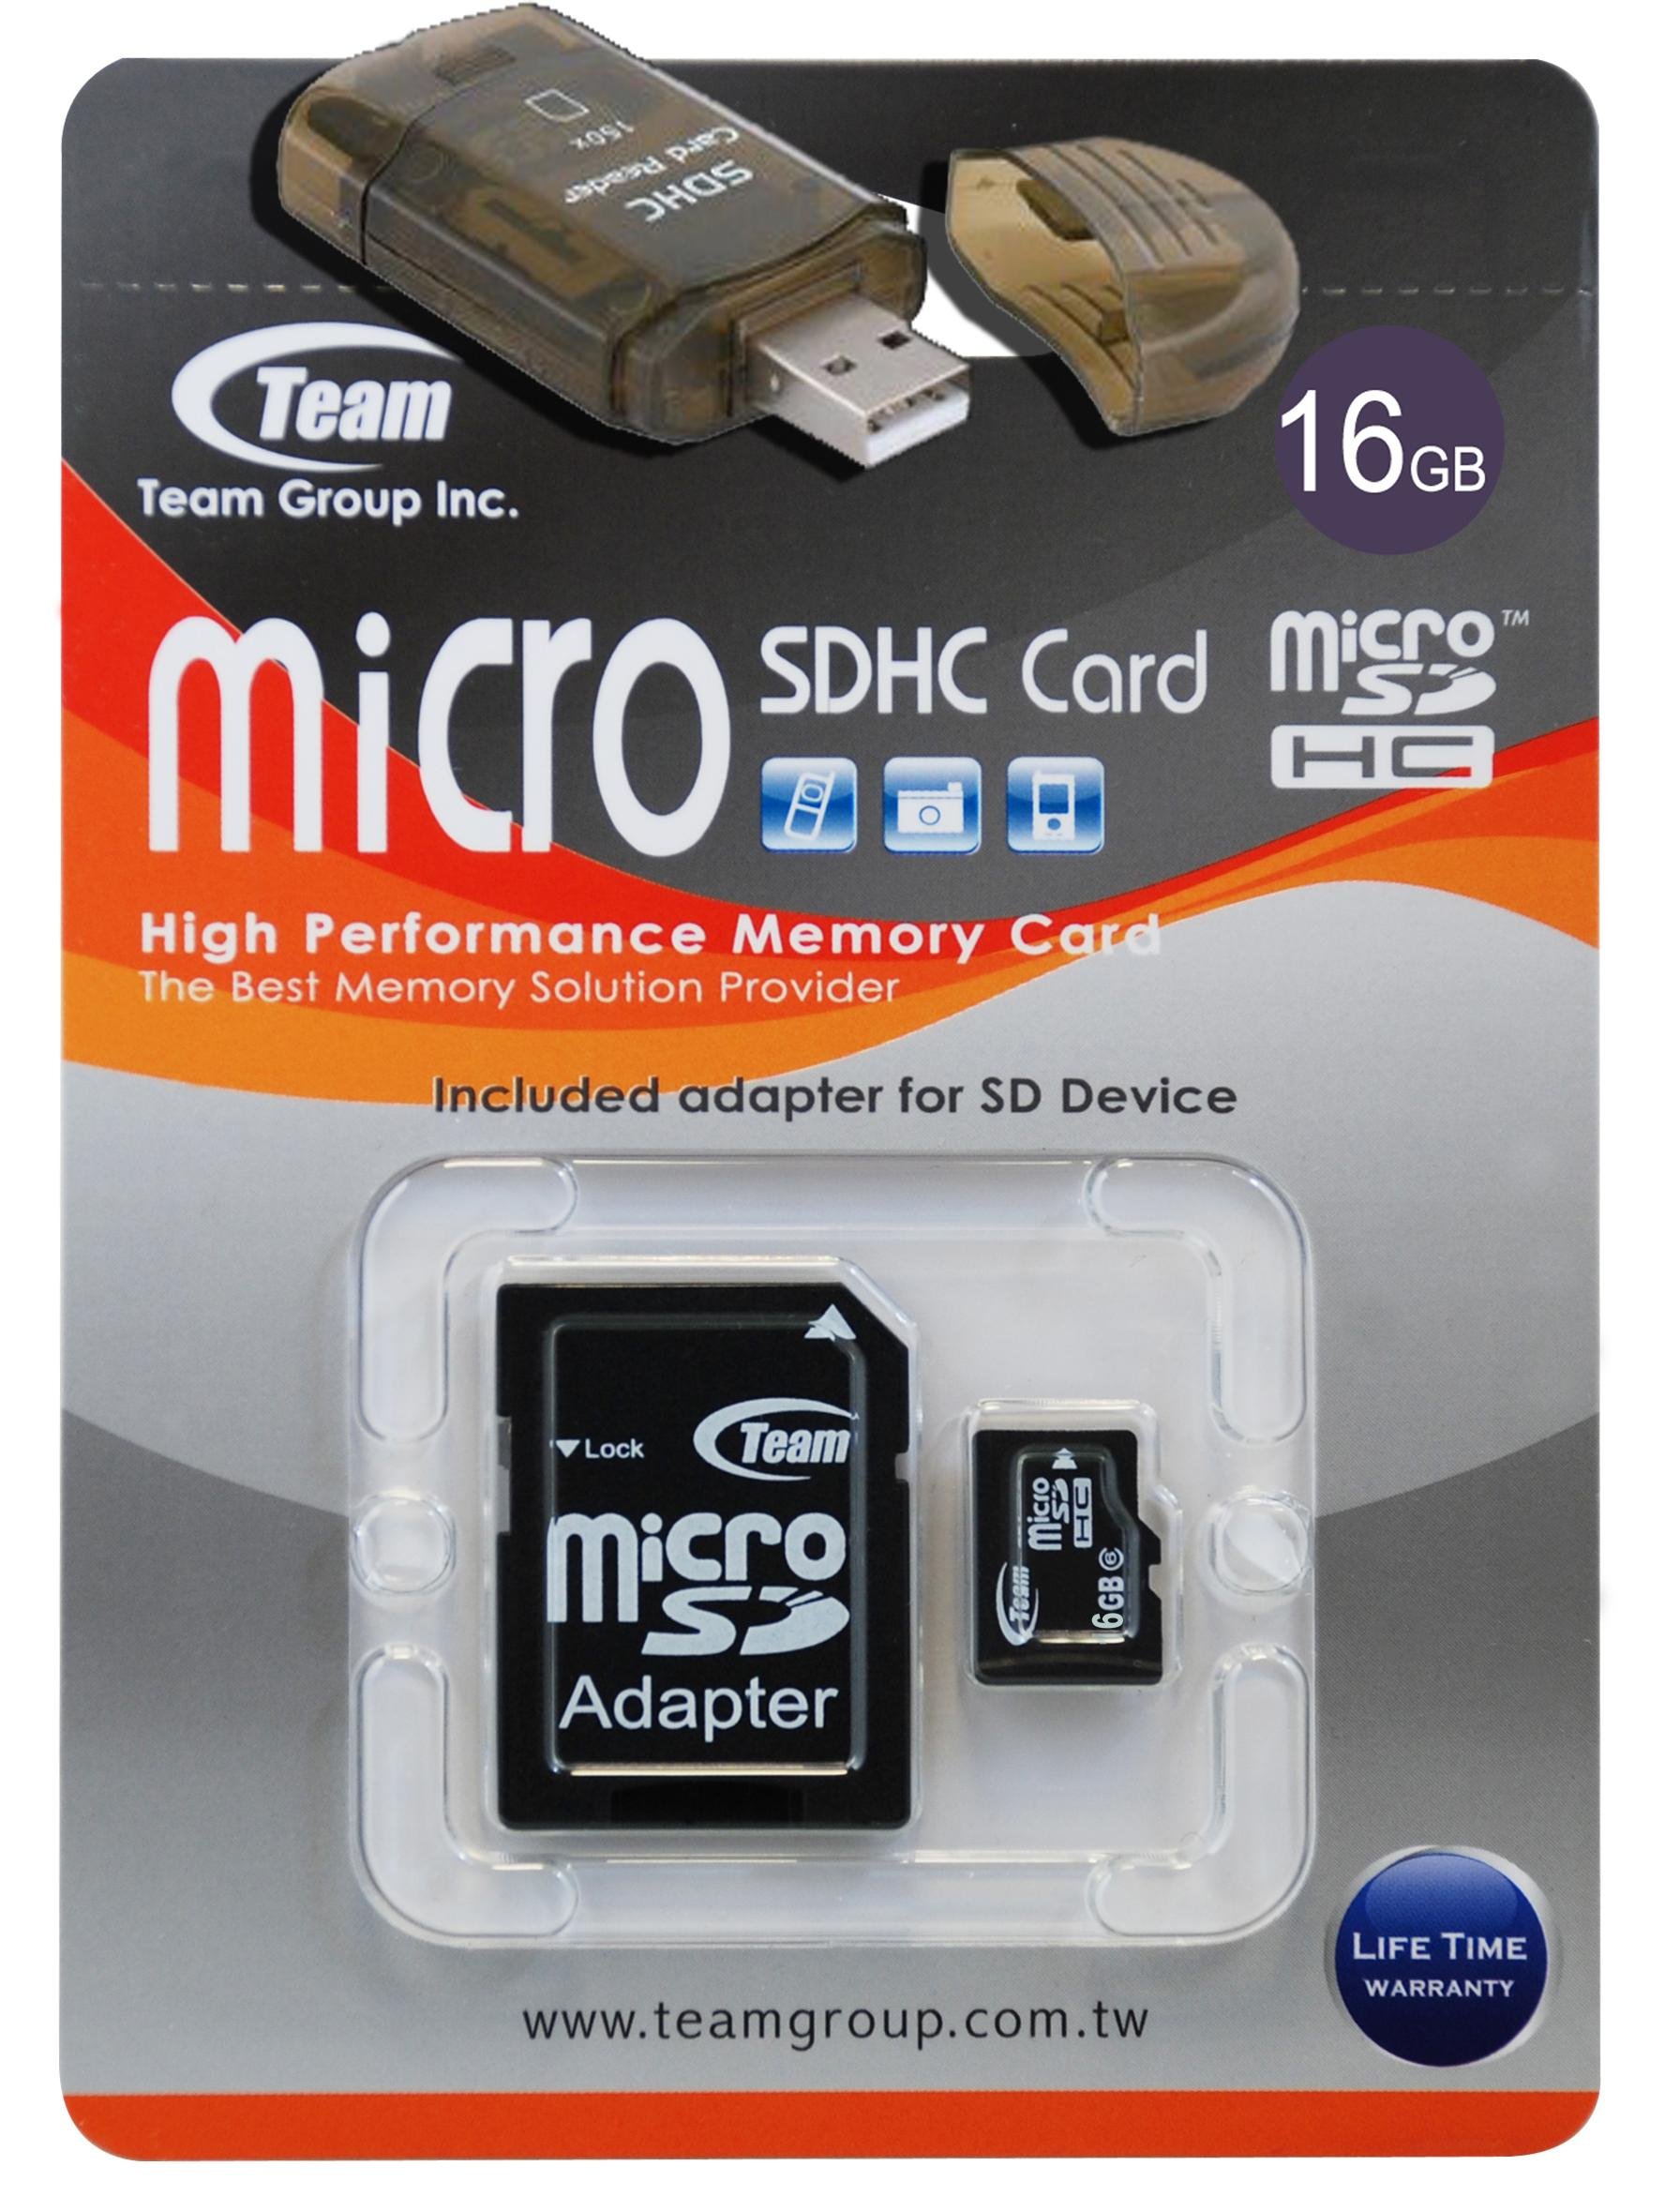 16GB Turbo Speed Class 6 MicroSDHC Memory Card For T-MOBILE SAMSUNG MEMOIR. High Speed Card Comes with a free SD and USB Adap